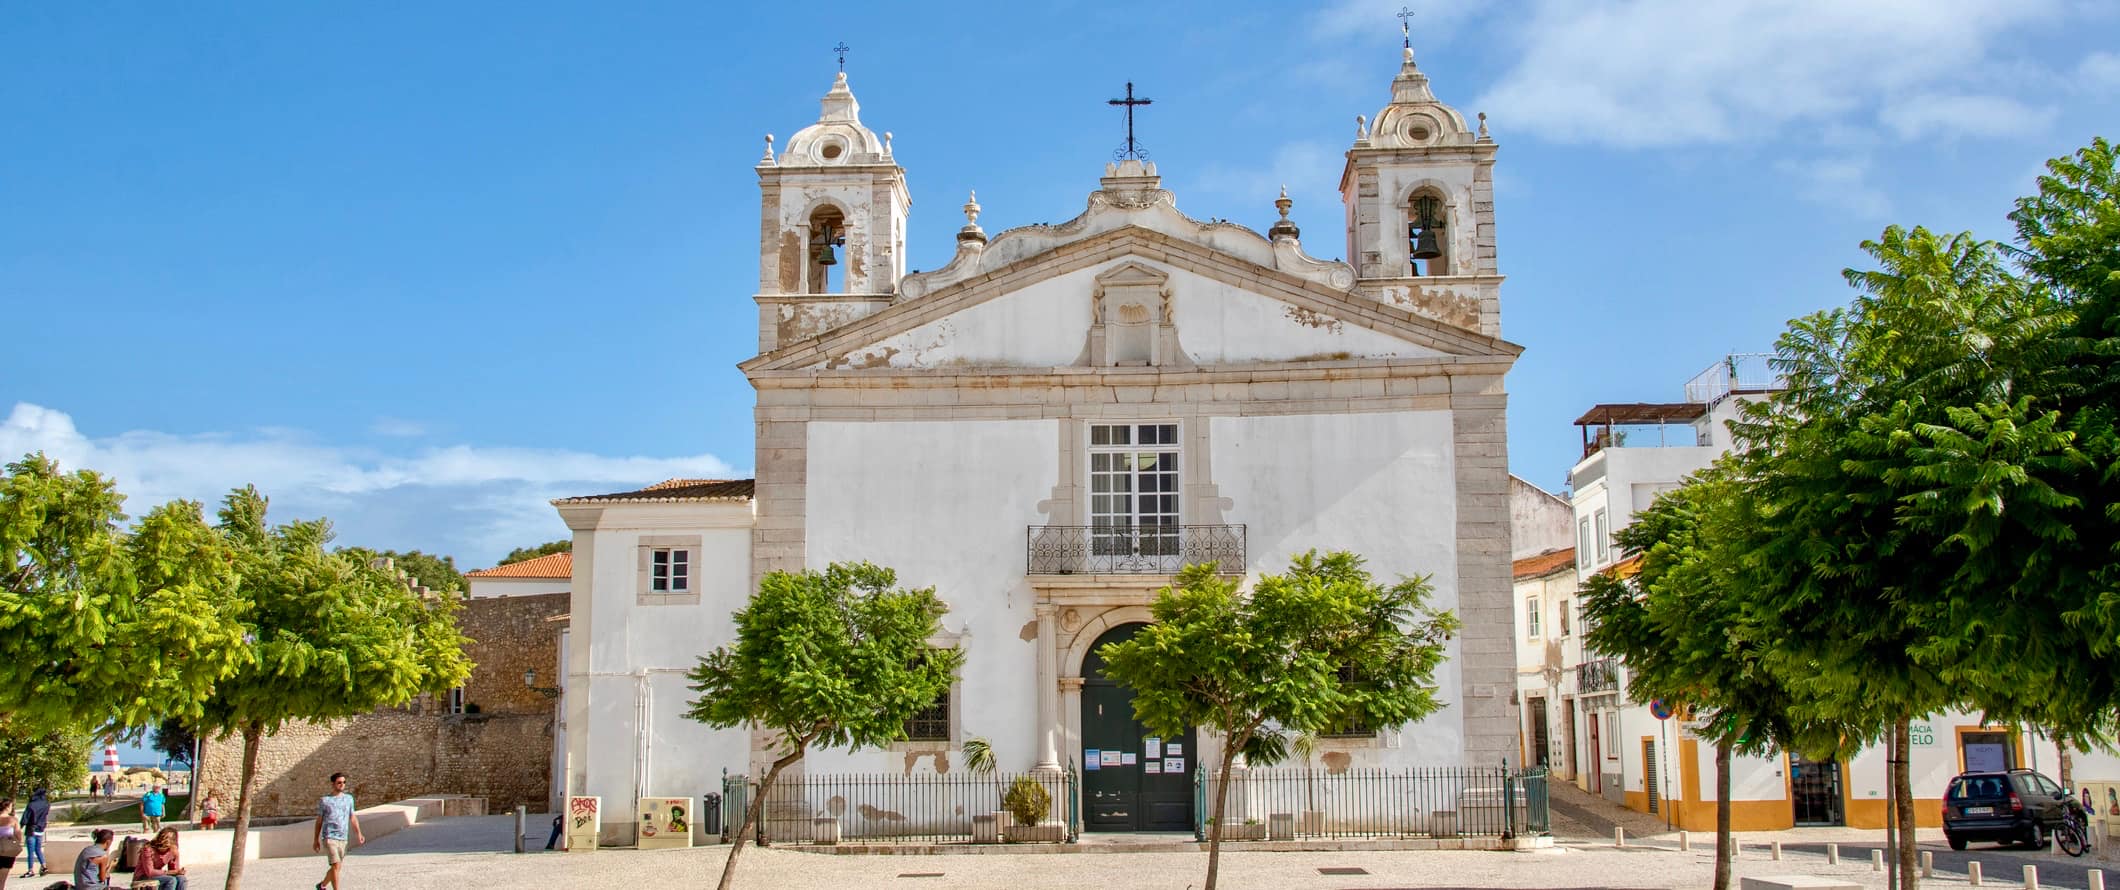 The historic Church of Santa Maria in Lagos, Portugal on a sunny day